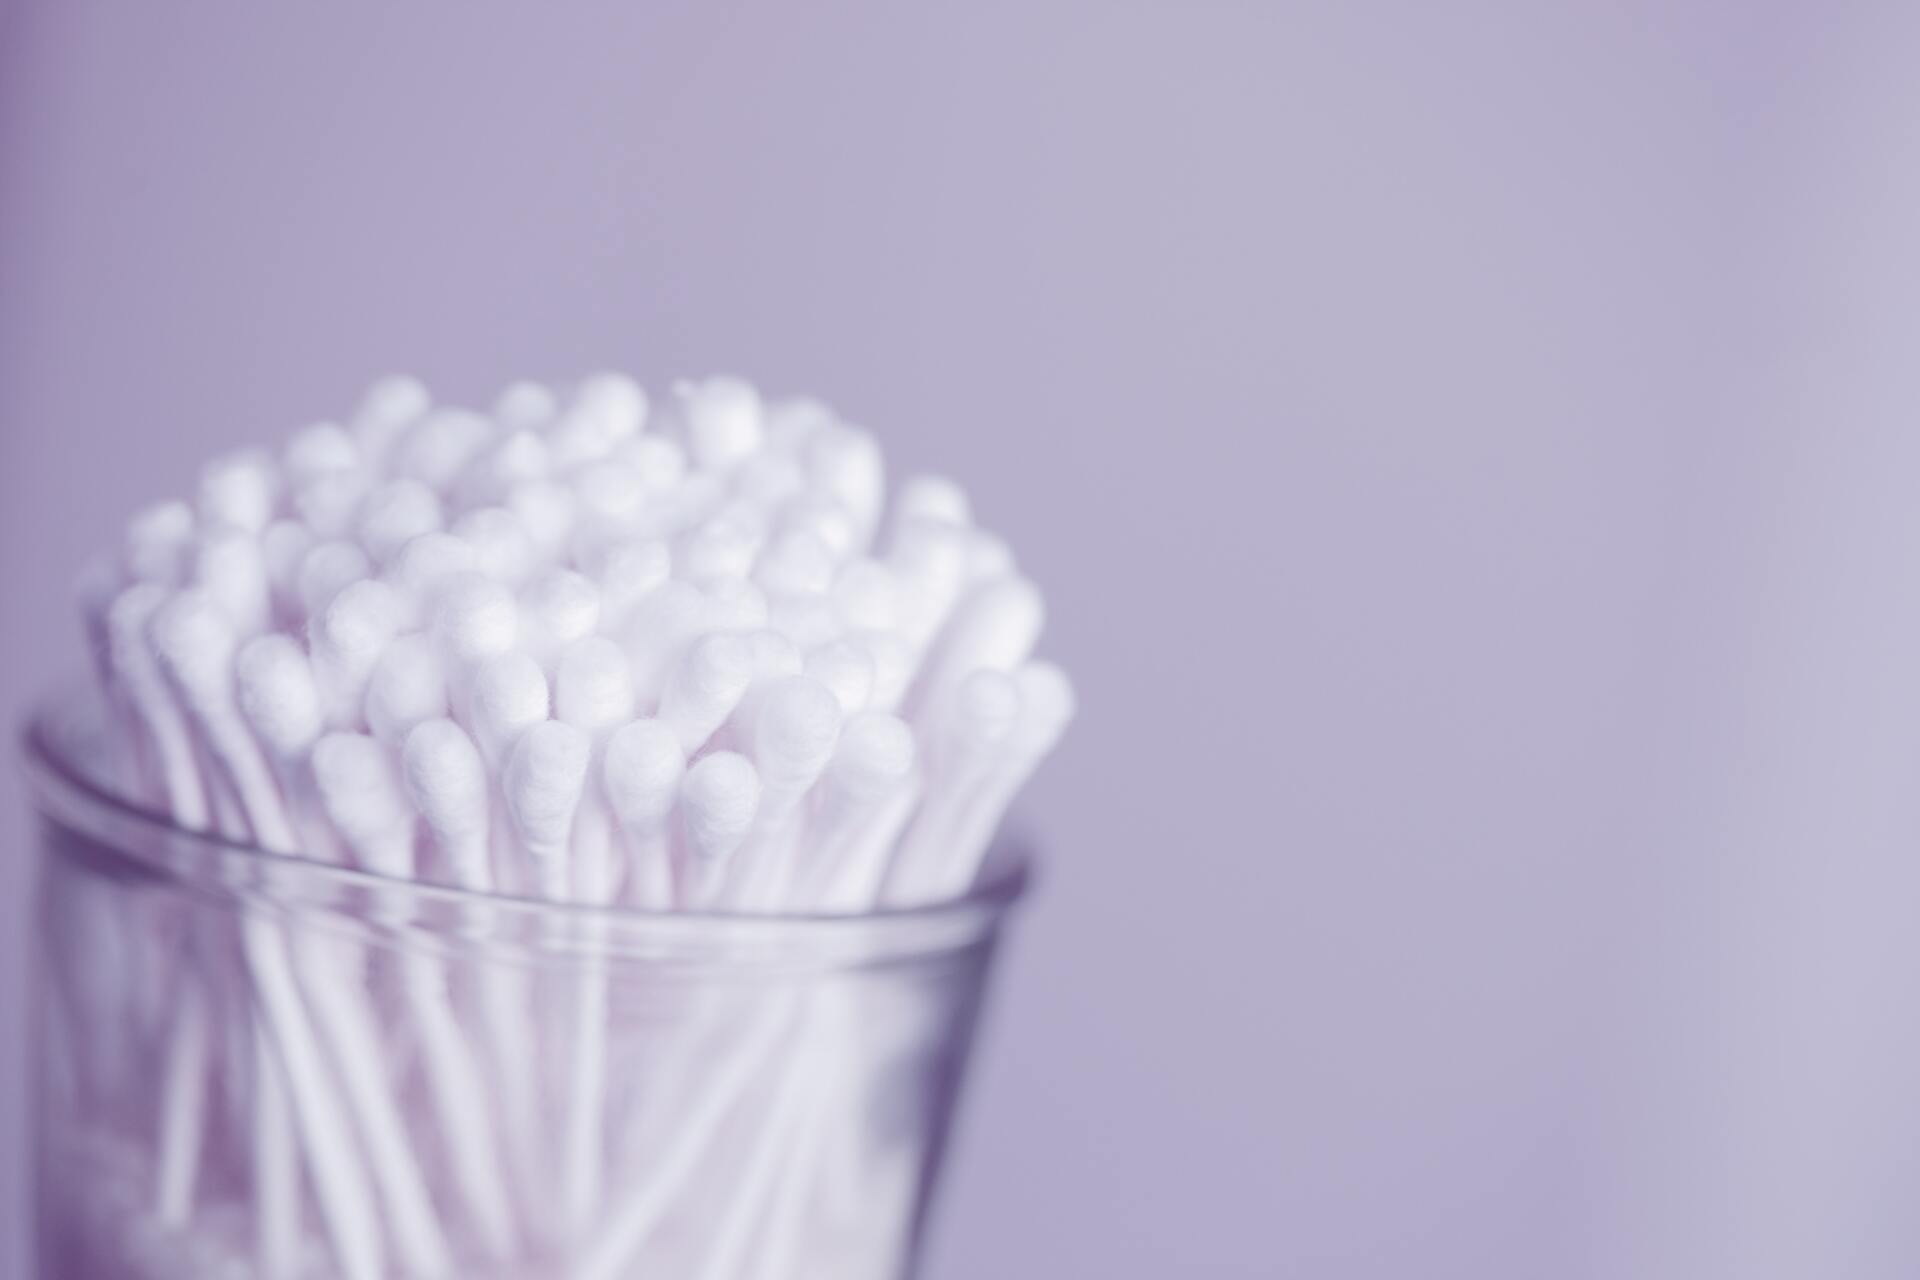 Picture of q-tips in a jar